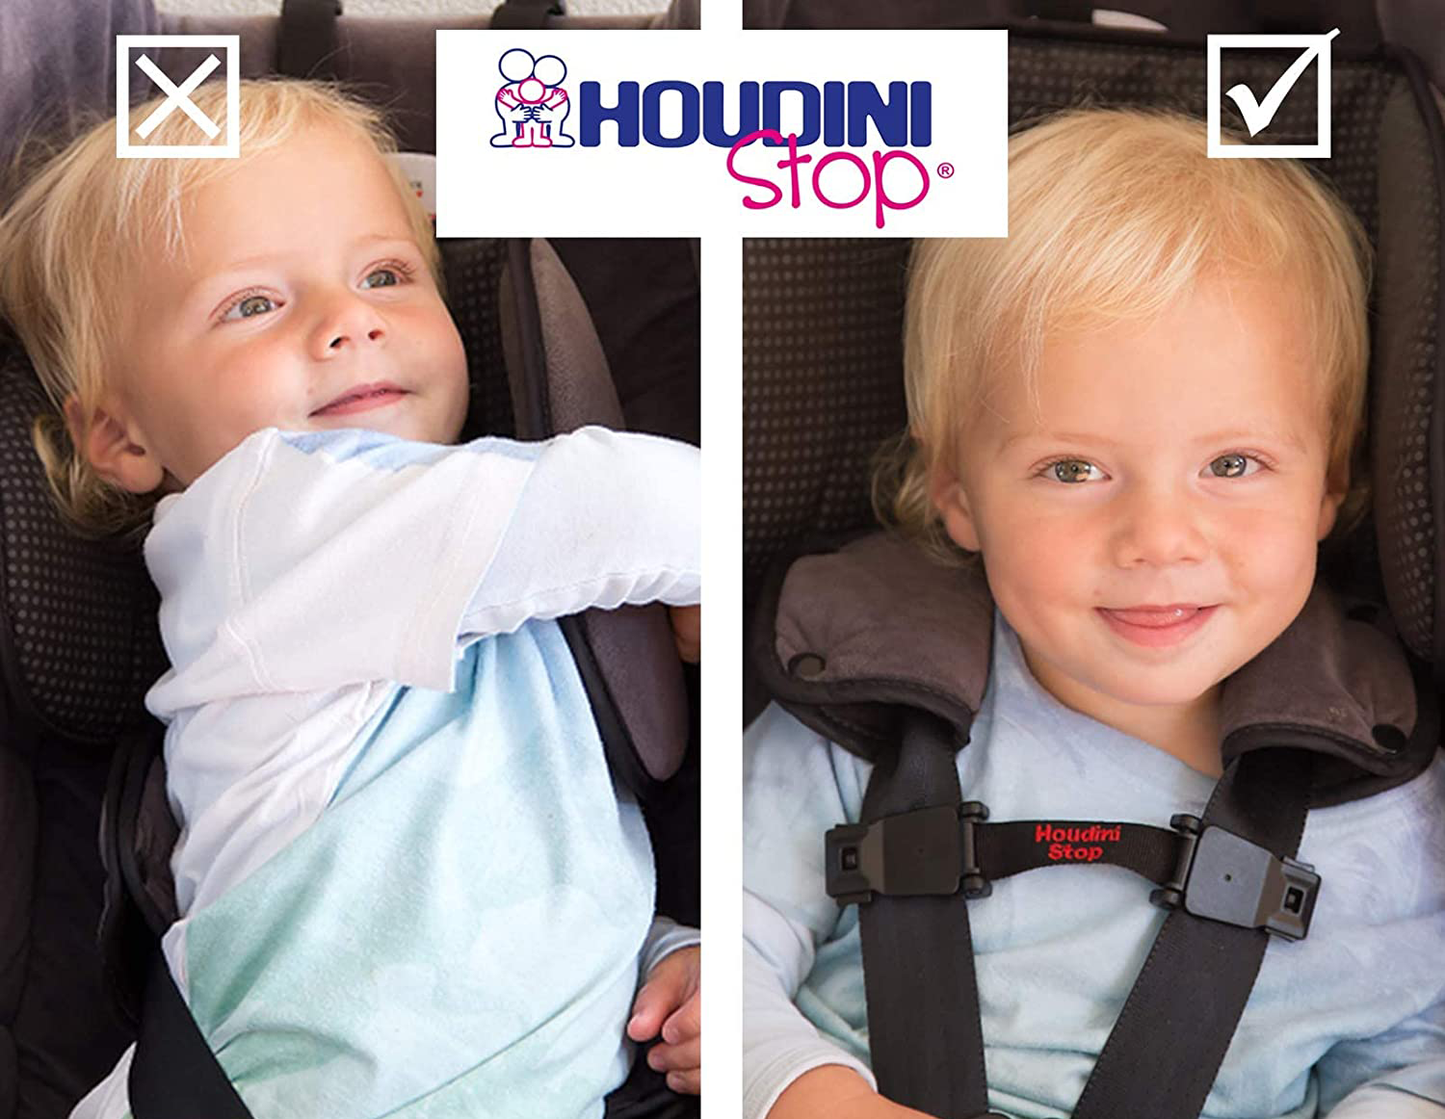 Houdini Stop - Car Seat Chest Strap